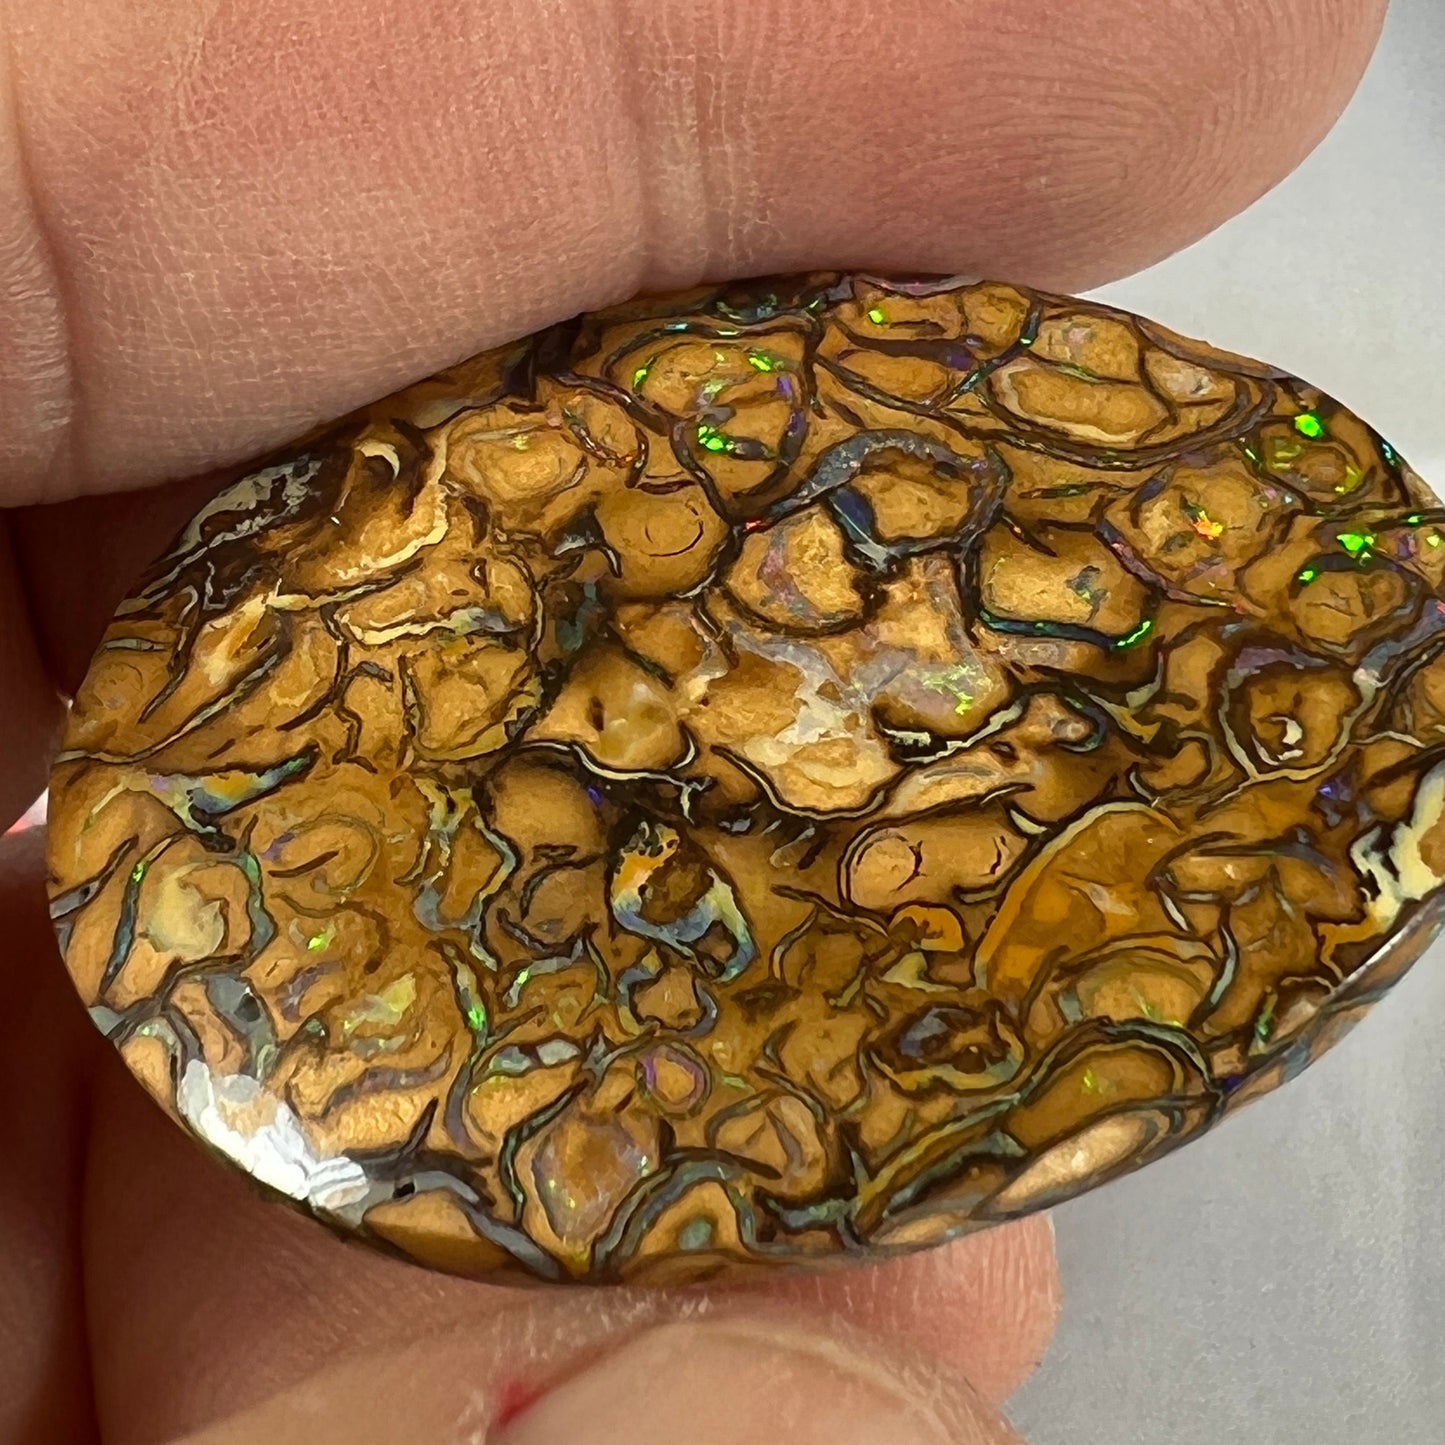 Large Yowah Matrix opal with a great pattern and colour.